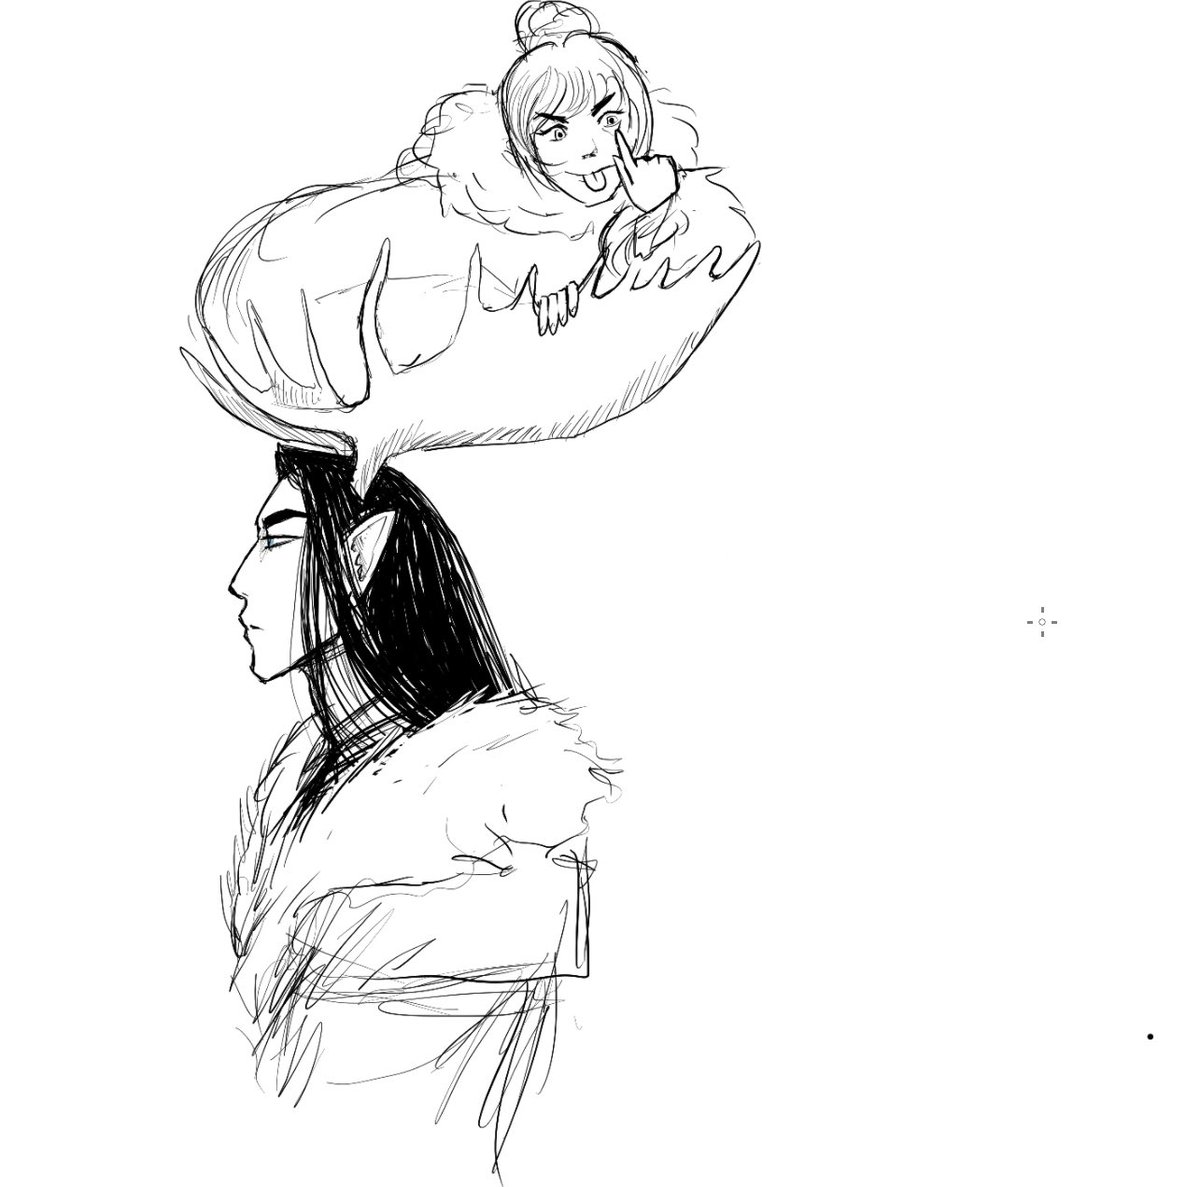 Moshang sketch from the most recent magma session on the bingliu server…
#svsss